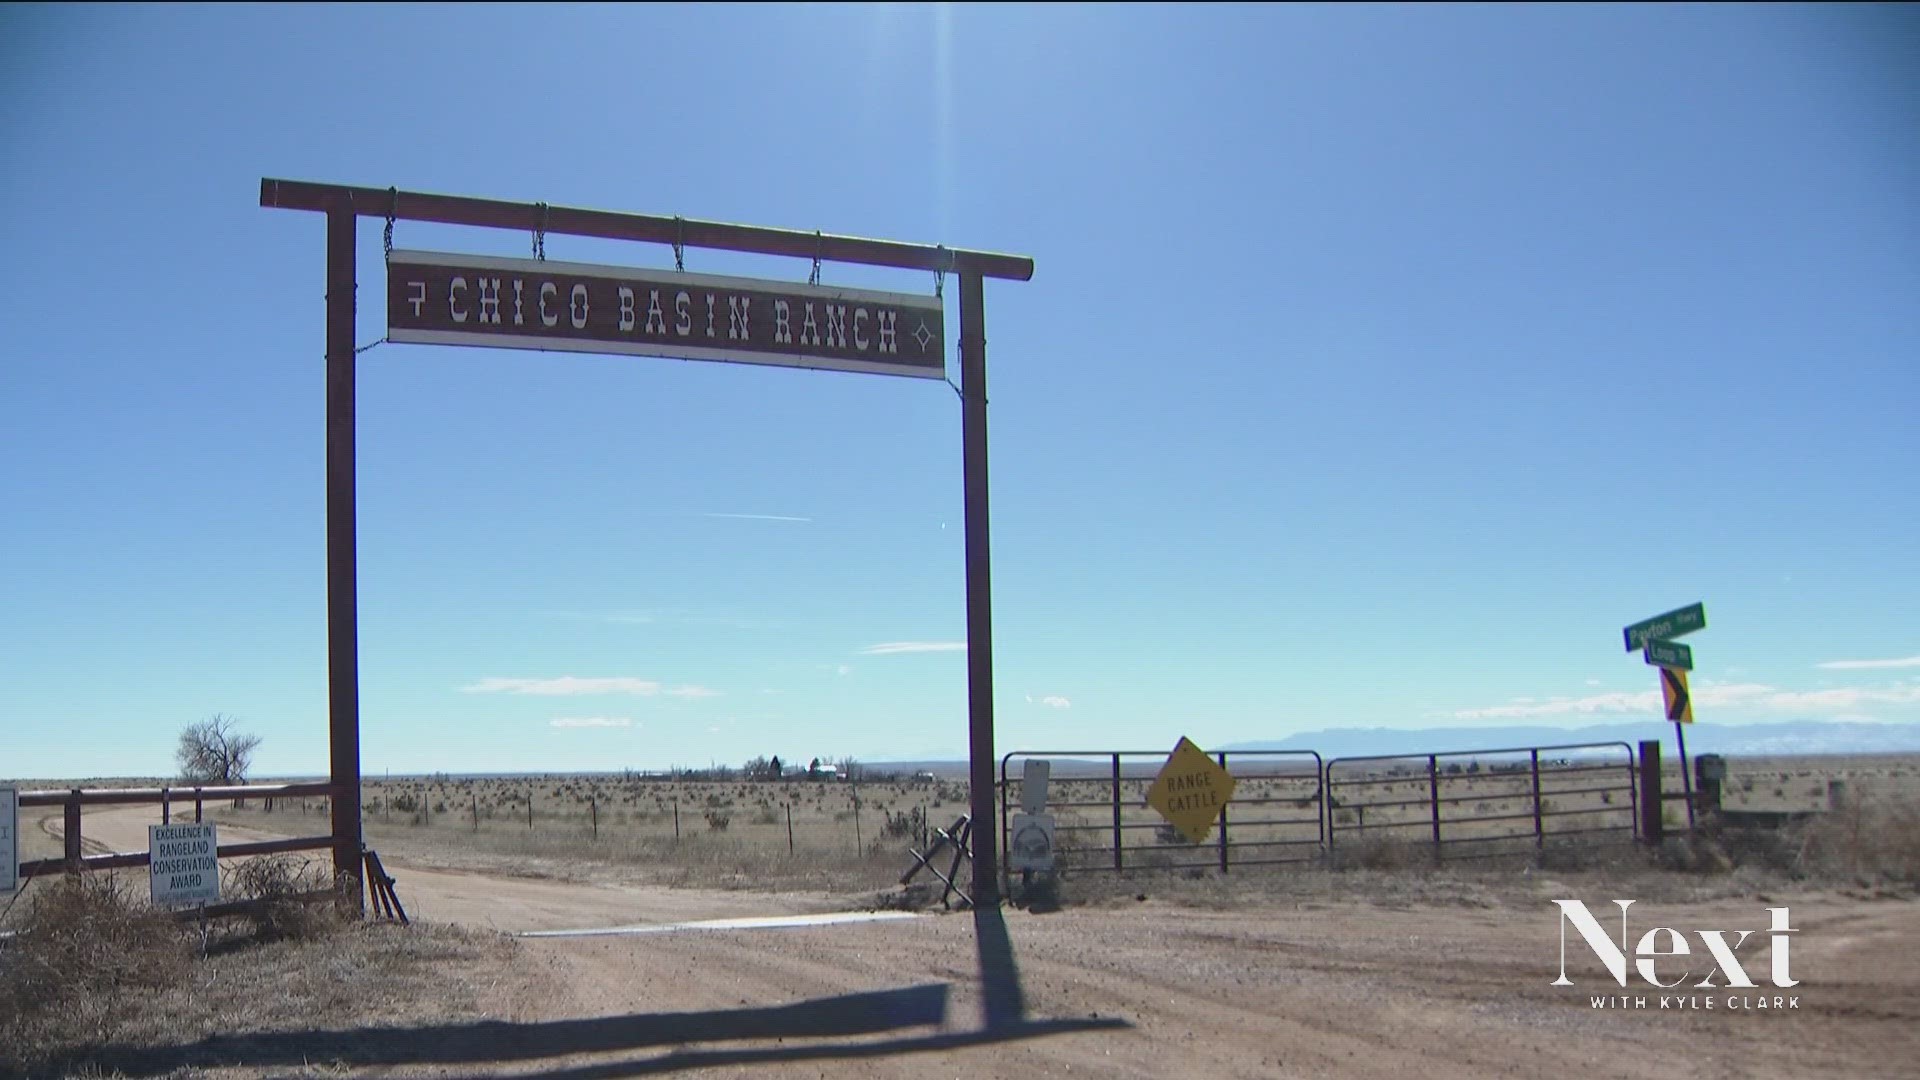 The Phillips family will likely be forced to move out of state to find a new ranch.